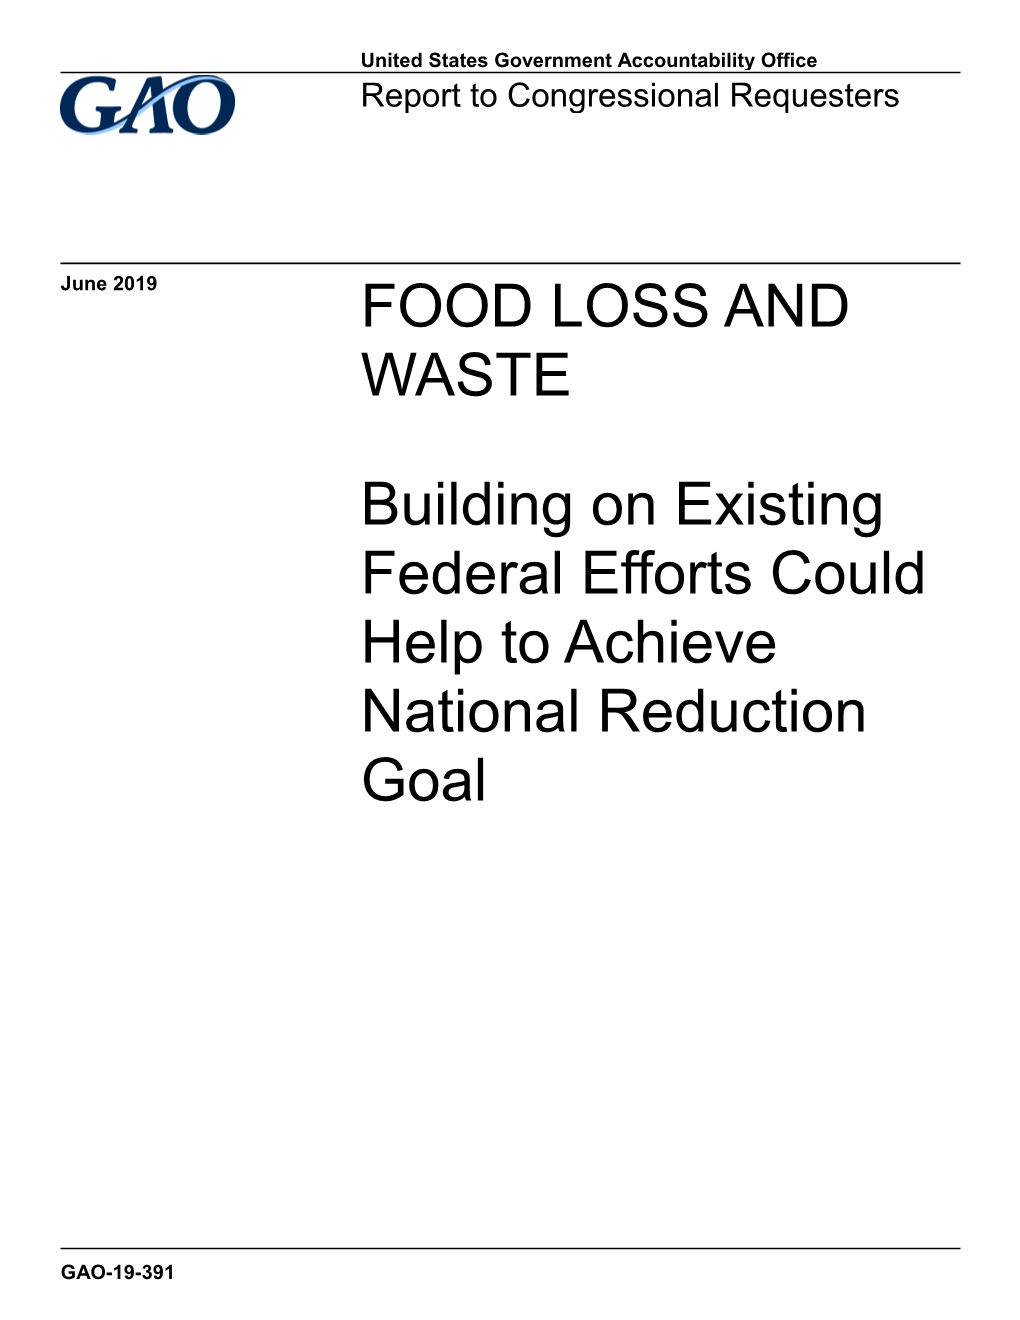 FOOD LOSS and WASTE Building on Existing Federal Efforts Could Help to Achieve National Reduction Goal